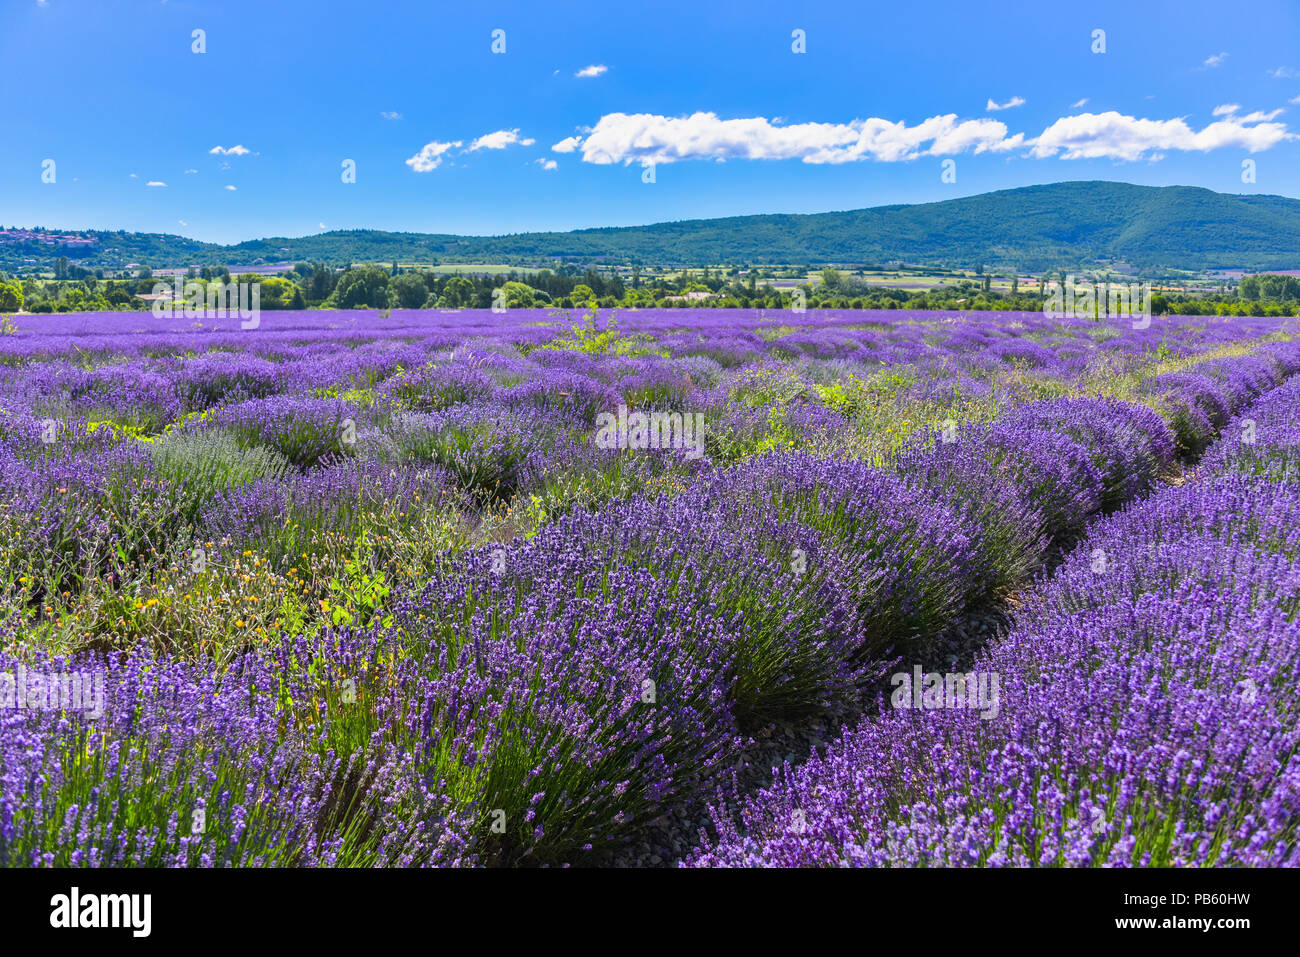 large lavender field with mountain range of the Vaucluse department near Sault, Provence, France, region Provence-Alpes-Côte d'Azur Stock Photo